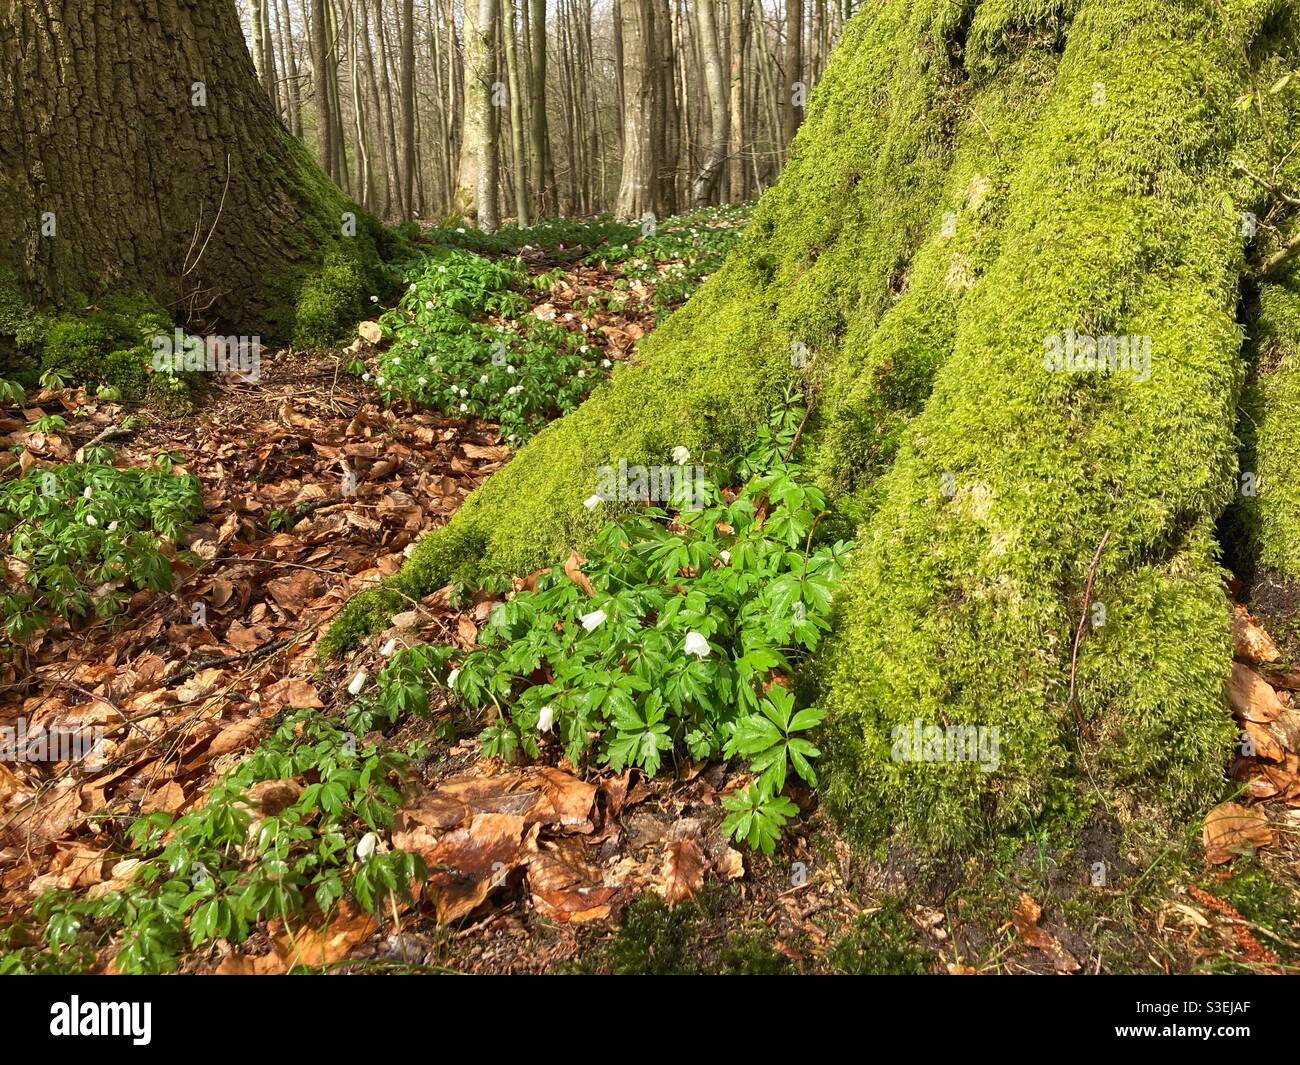 Anemone nemorosa growing at the base of a large tree in the Forest hasbruch in Spring, Hude, Lower Saxony, Germany Stock Photo